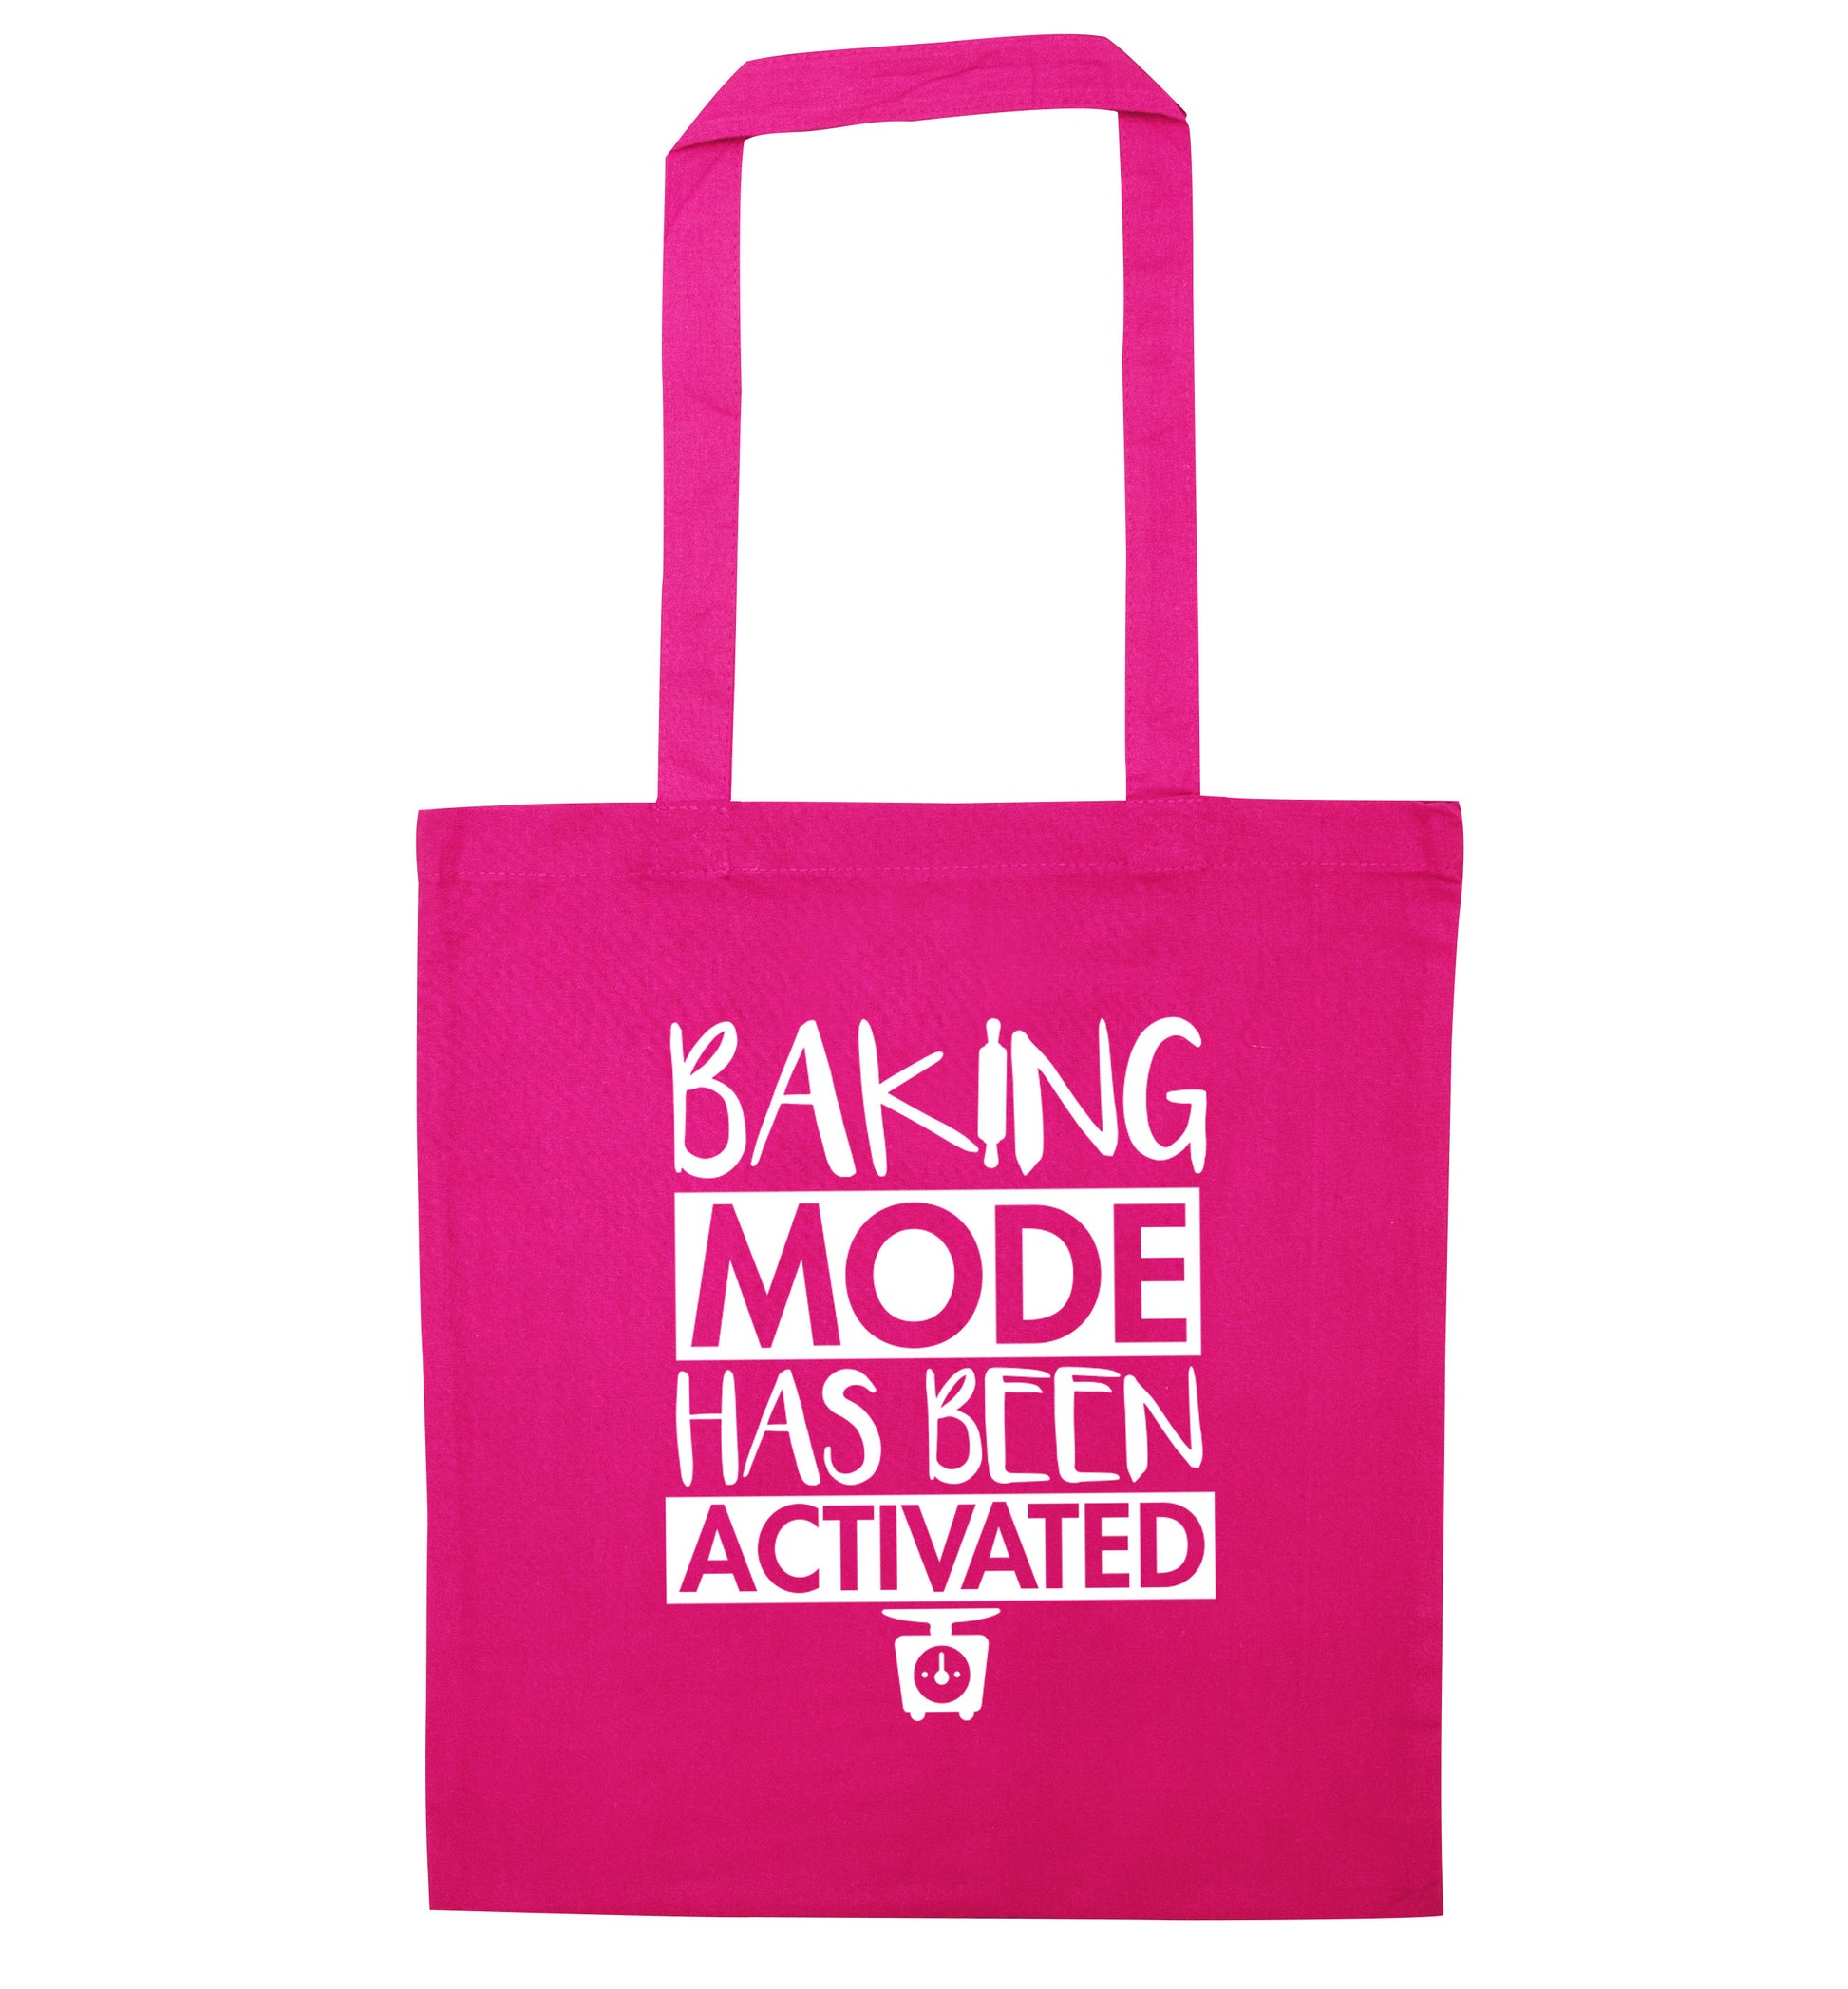 Baking mode has been activated pink tote bag